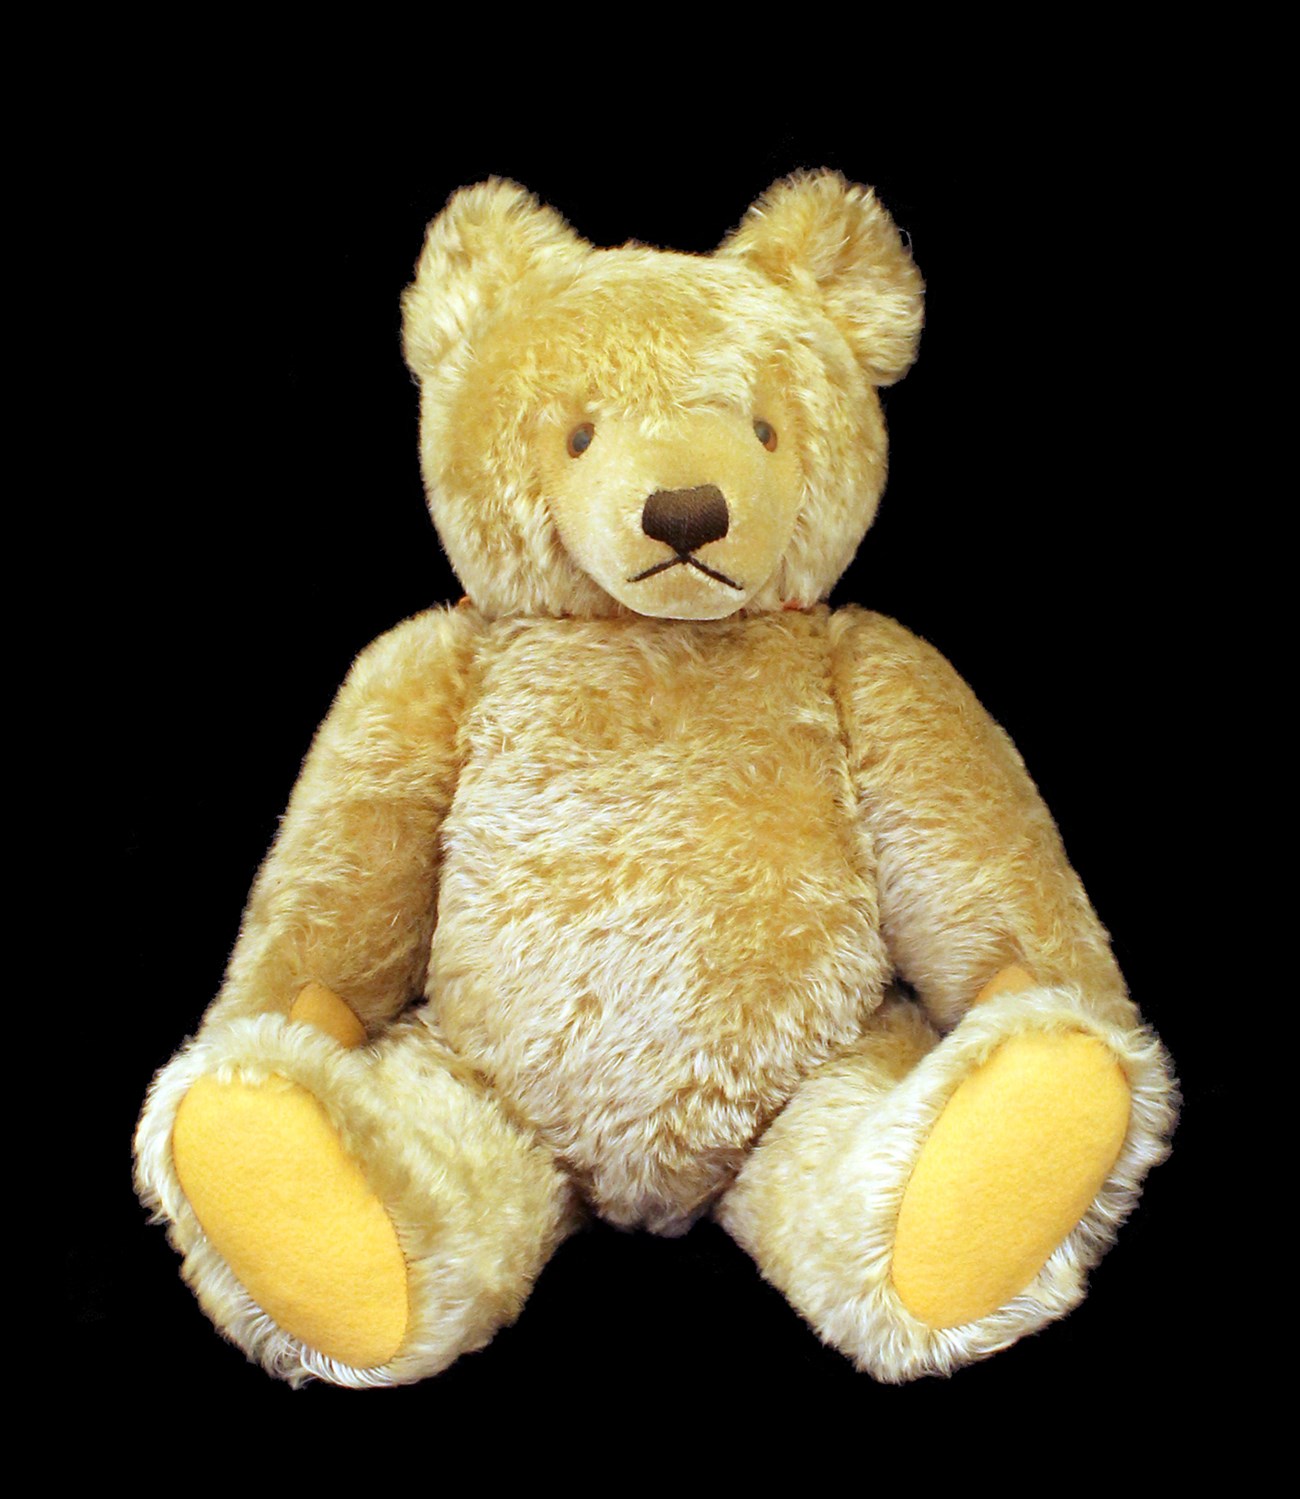 Light brown jointed teddy bear